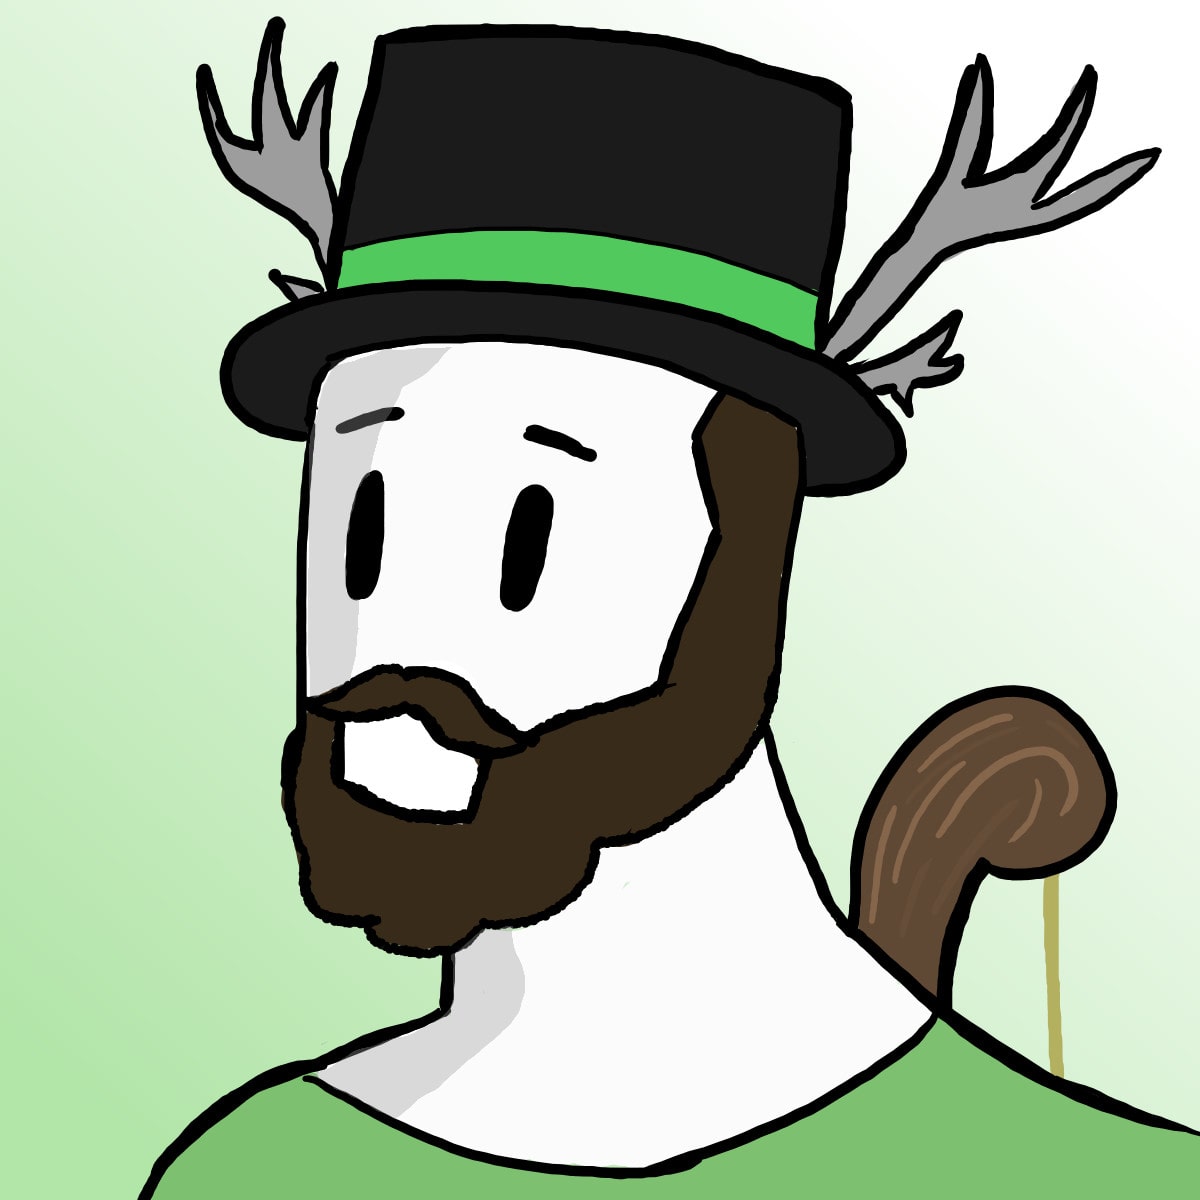 Draw Your Roblox Avatar By Oxfries - roblox builder man avatar